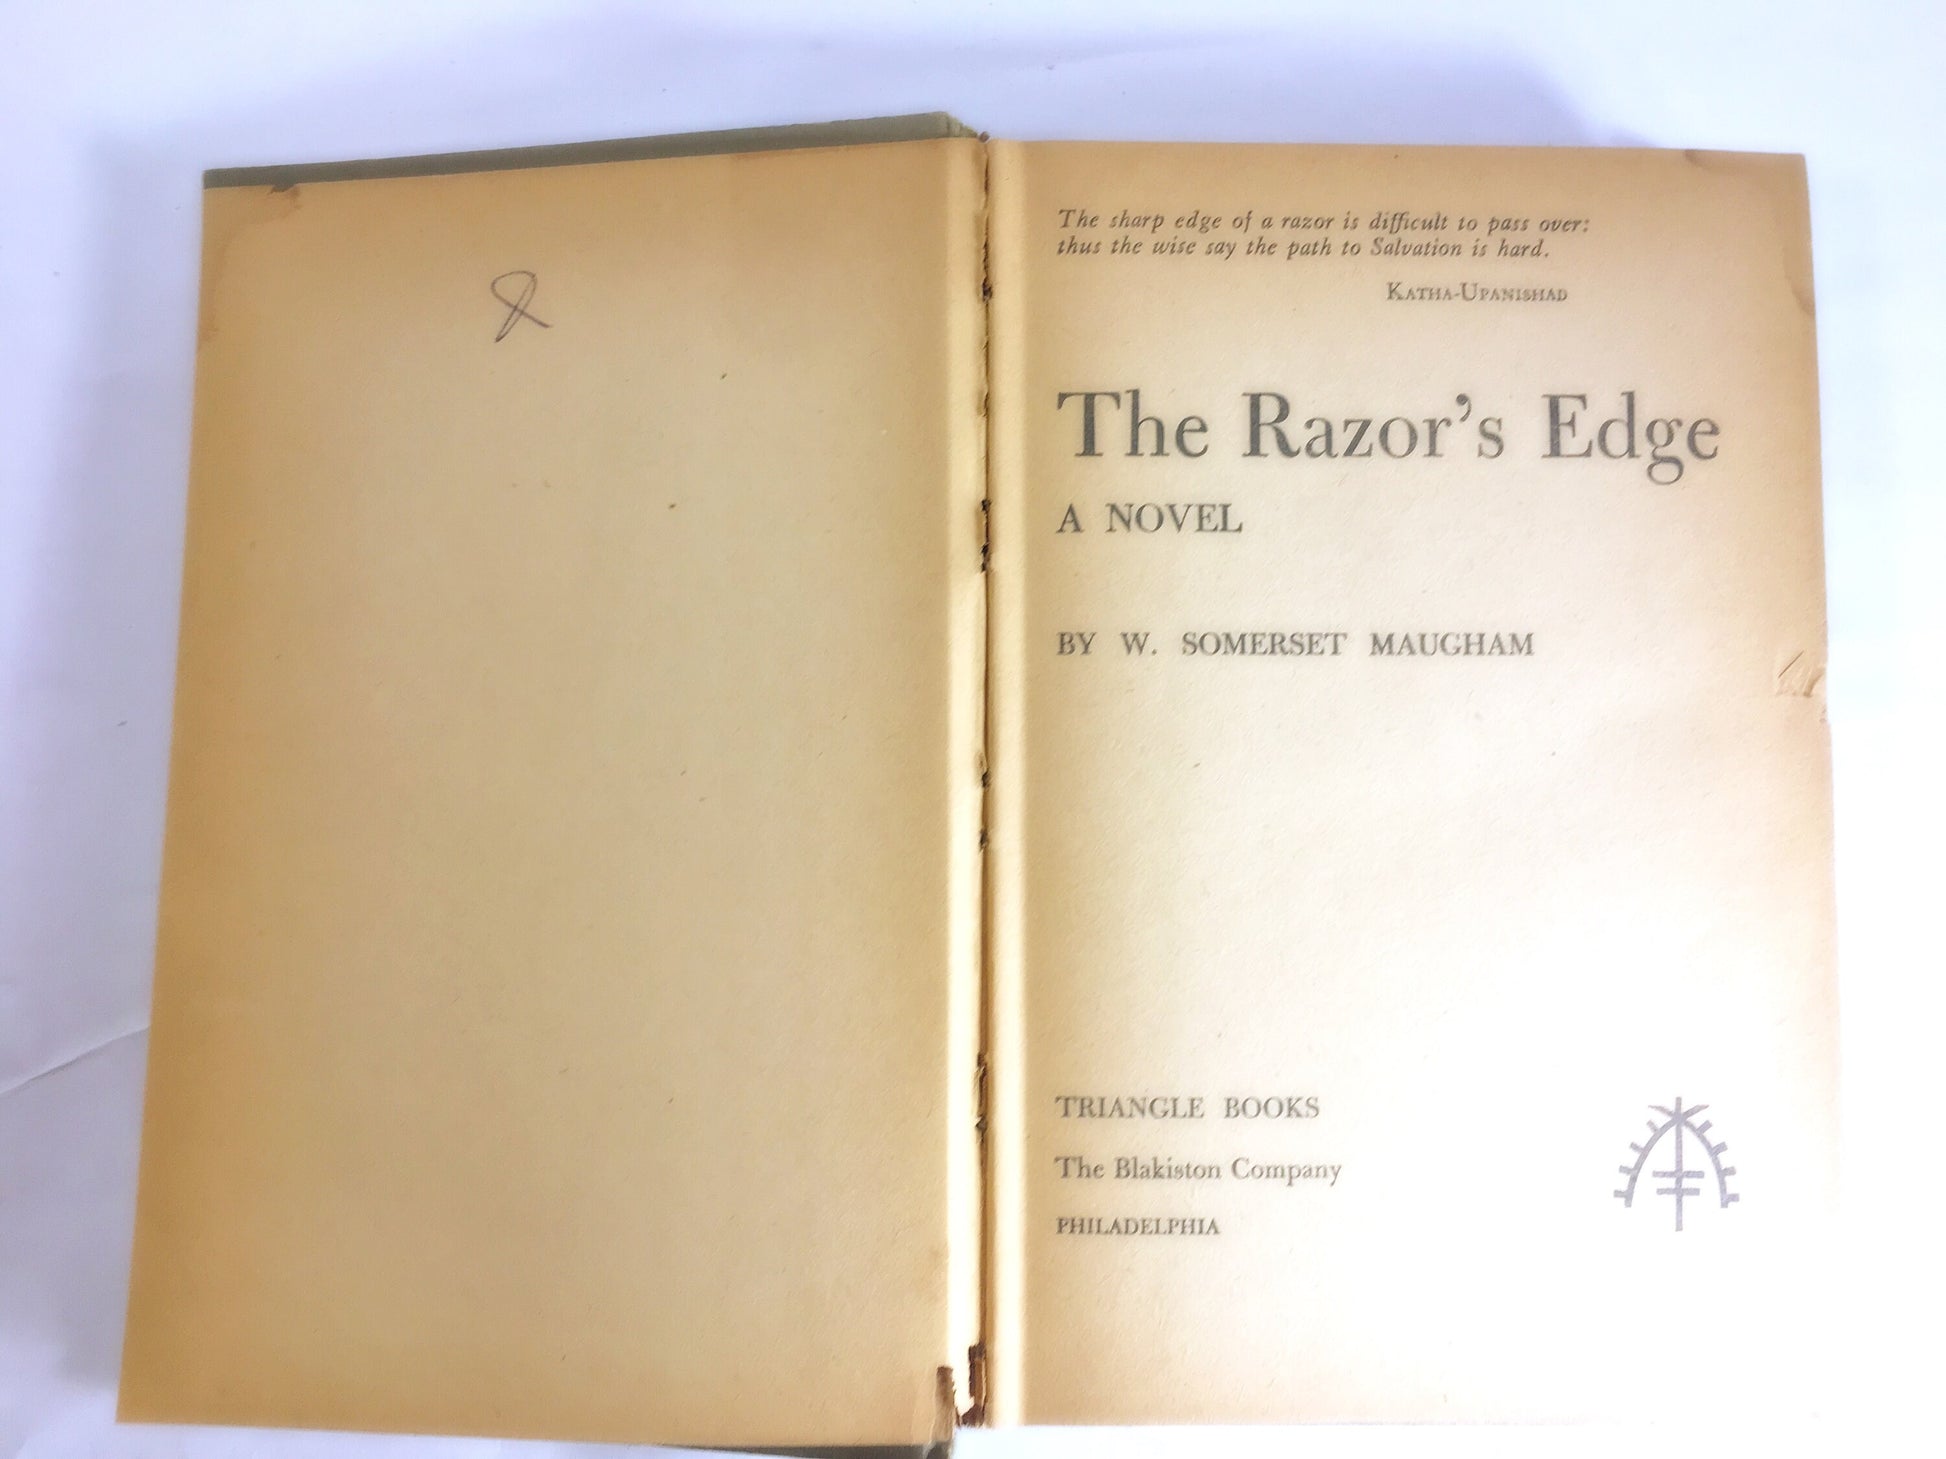 1944 Razor's Edge by W Somerset Maugham Vintage book about a World War I fighter pilot who searches for meaning. White bookshelf decor